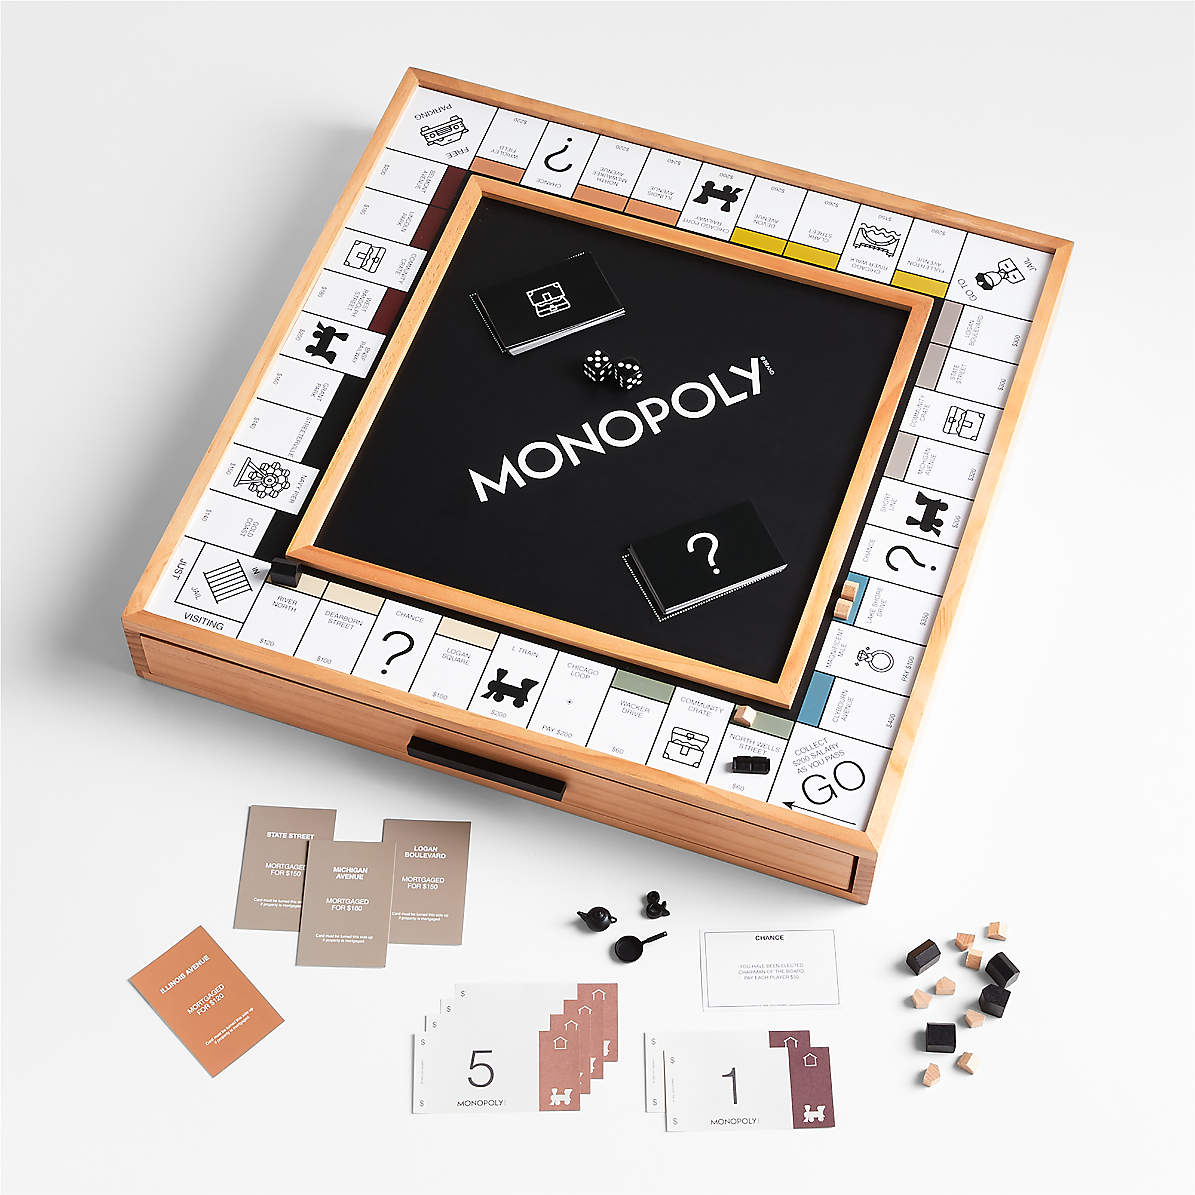 Monopoly Luxury Edition Board Game